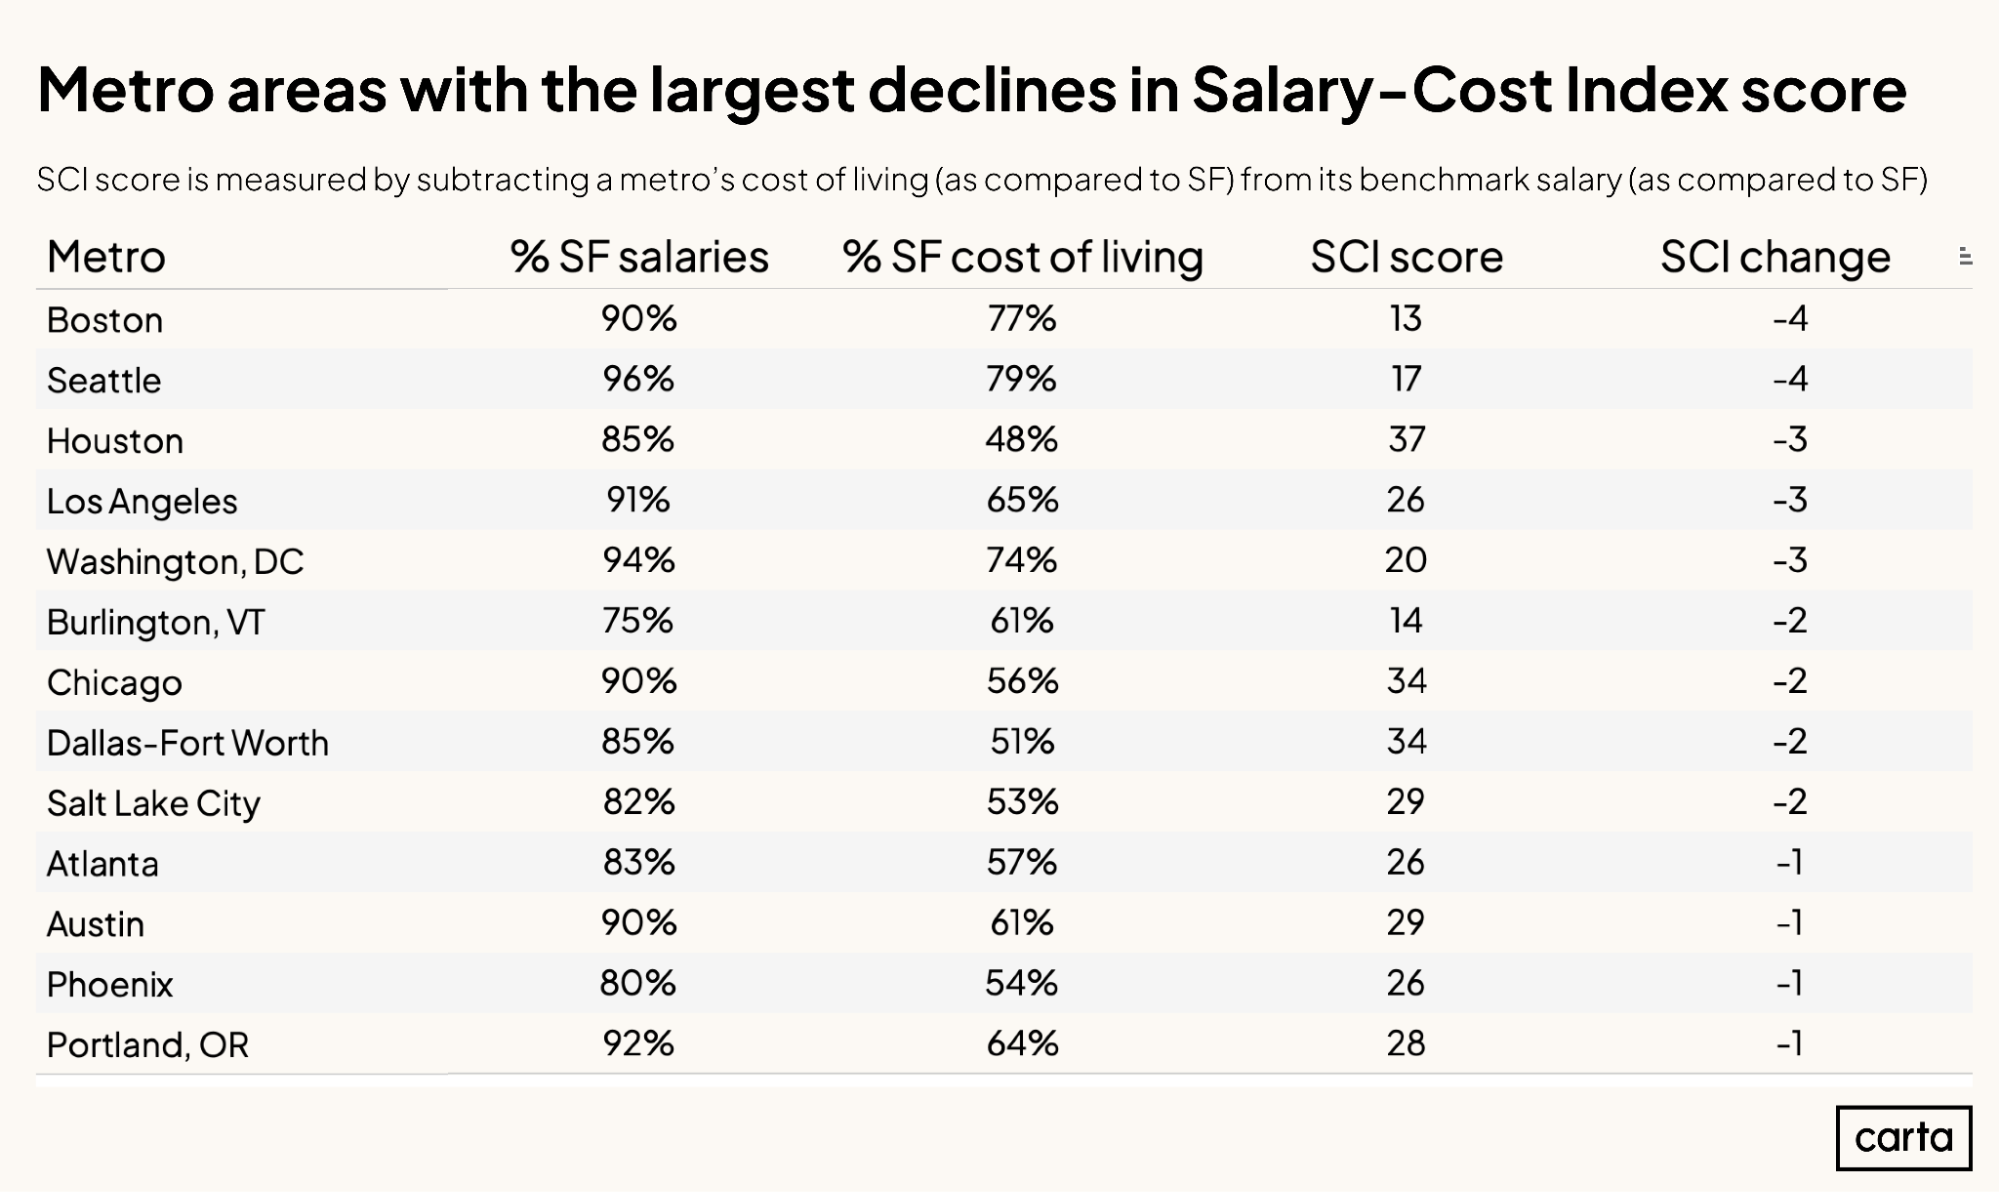 Metro areas with the largest declines in Salary-Cost Index score